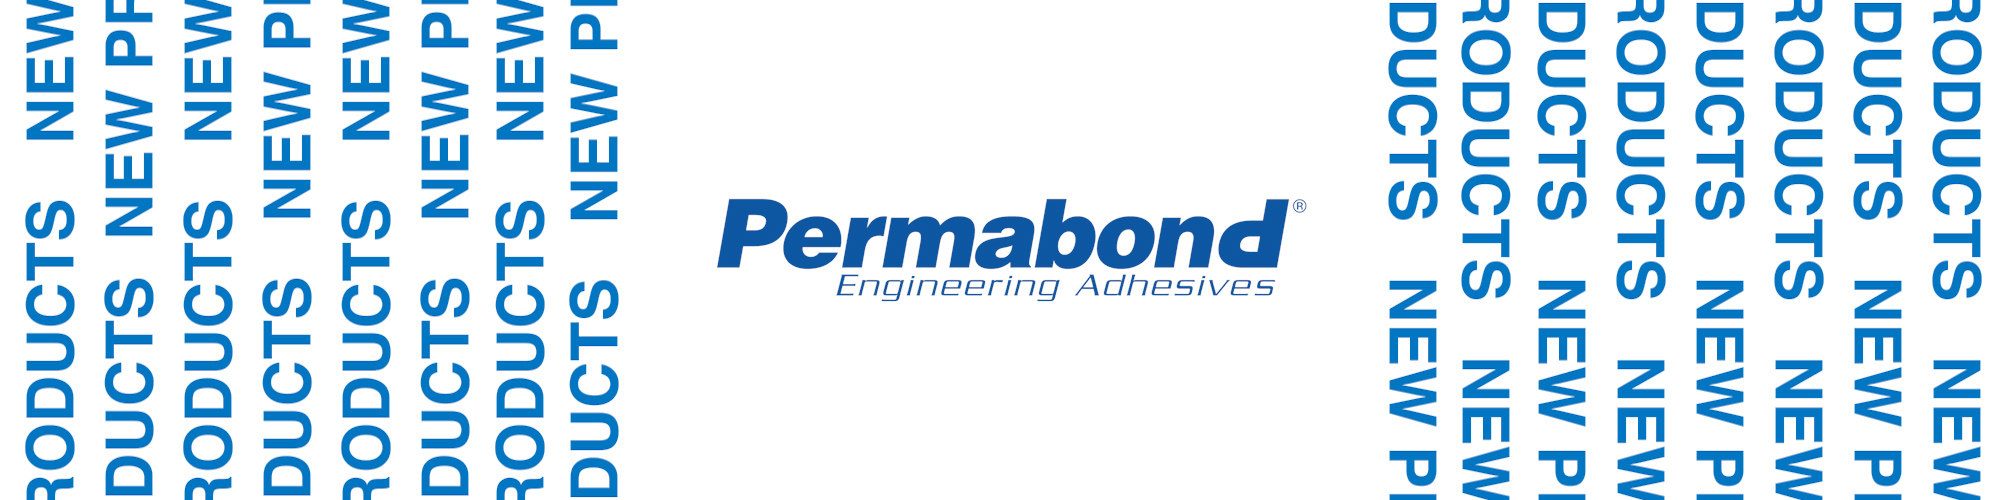 New Permabond products